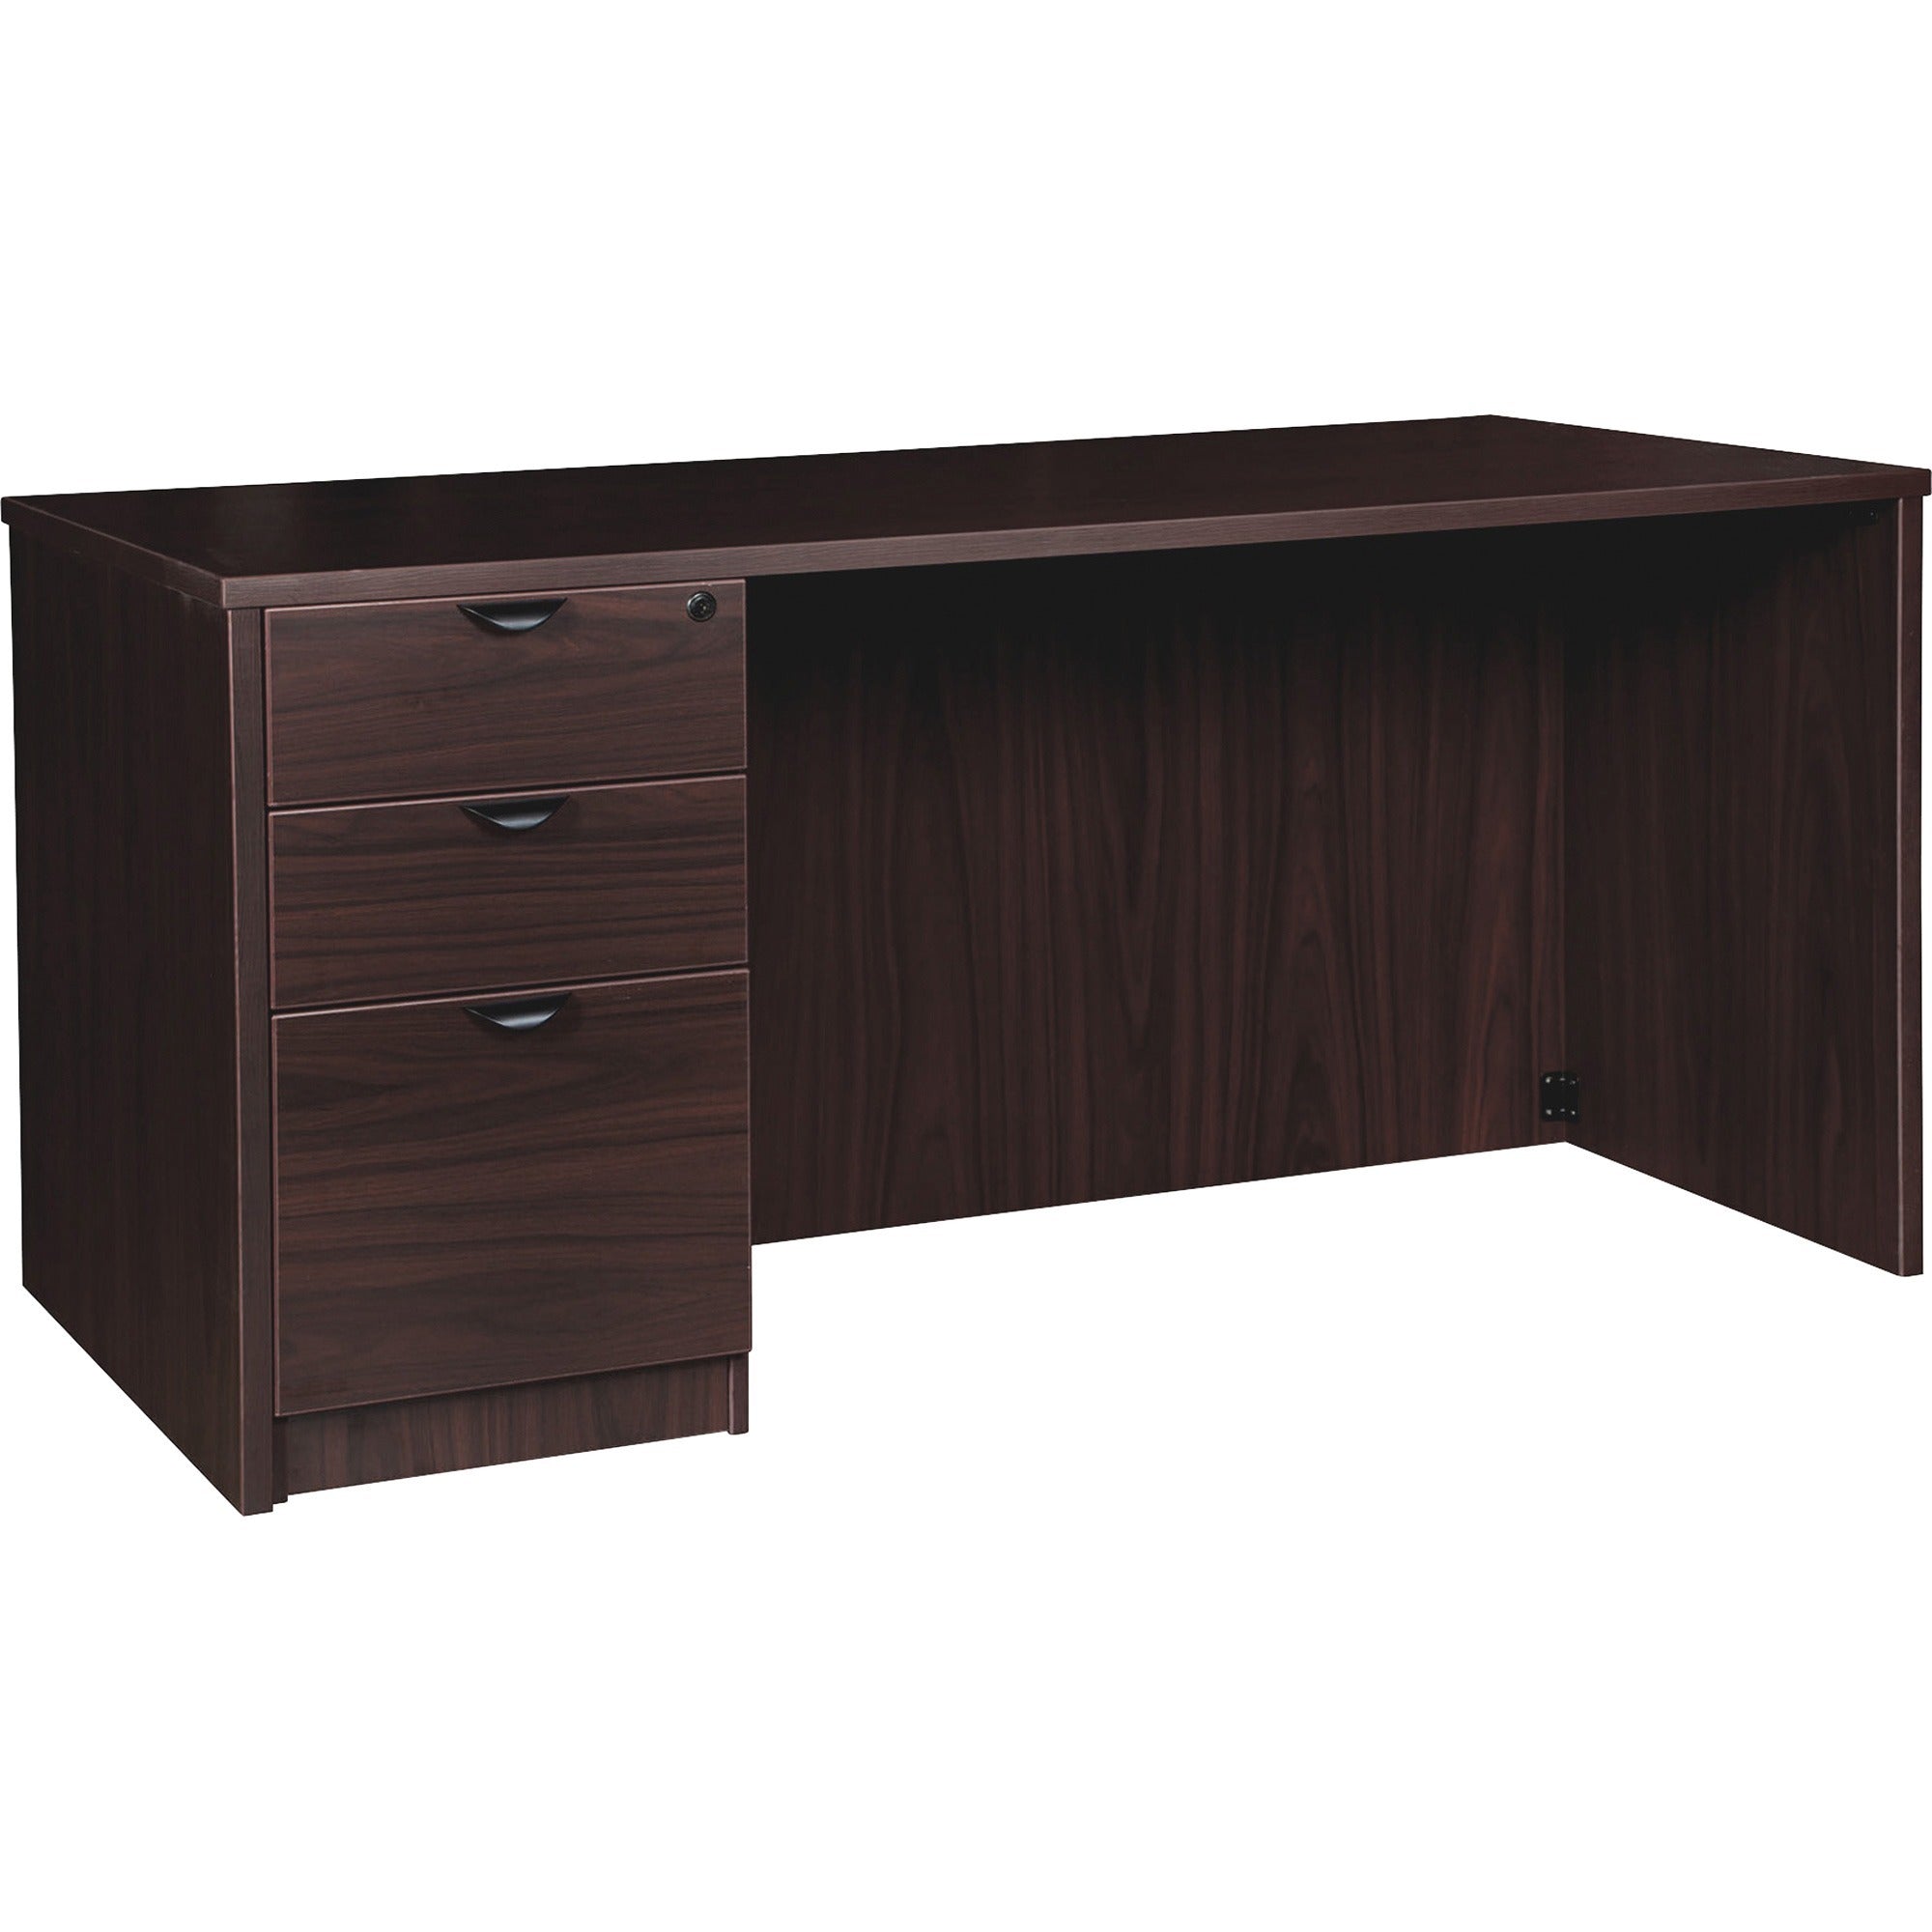 lorell-prominence-20-left-pedestal-desk-1-top-60-x-3029-3-x-file-box-drawers-single-pedestal-on-left-side-band-edge-material-particleboard-finish-espresso-laminate-thermofused-melamine-tfm_llrpd3060lspes - 1